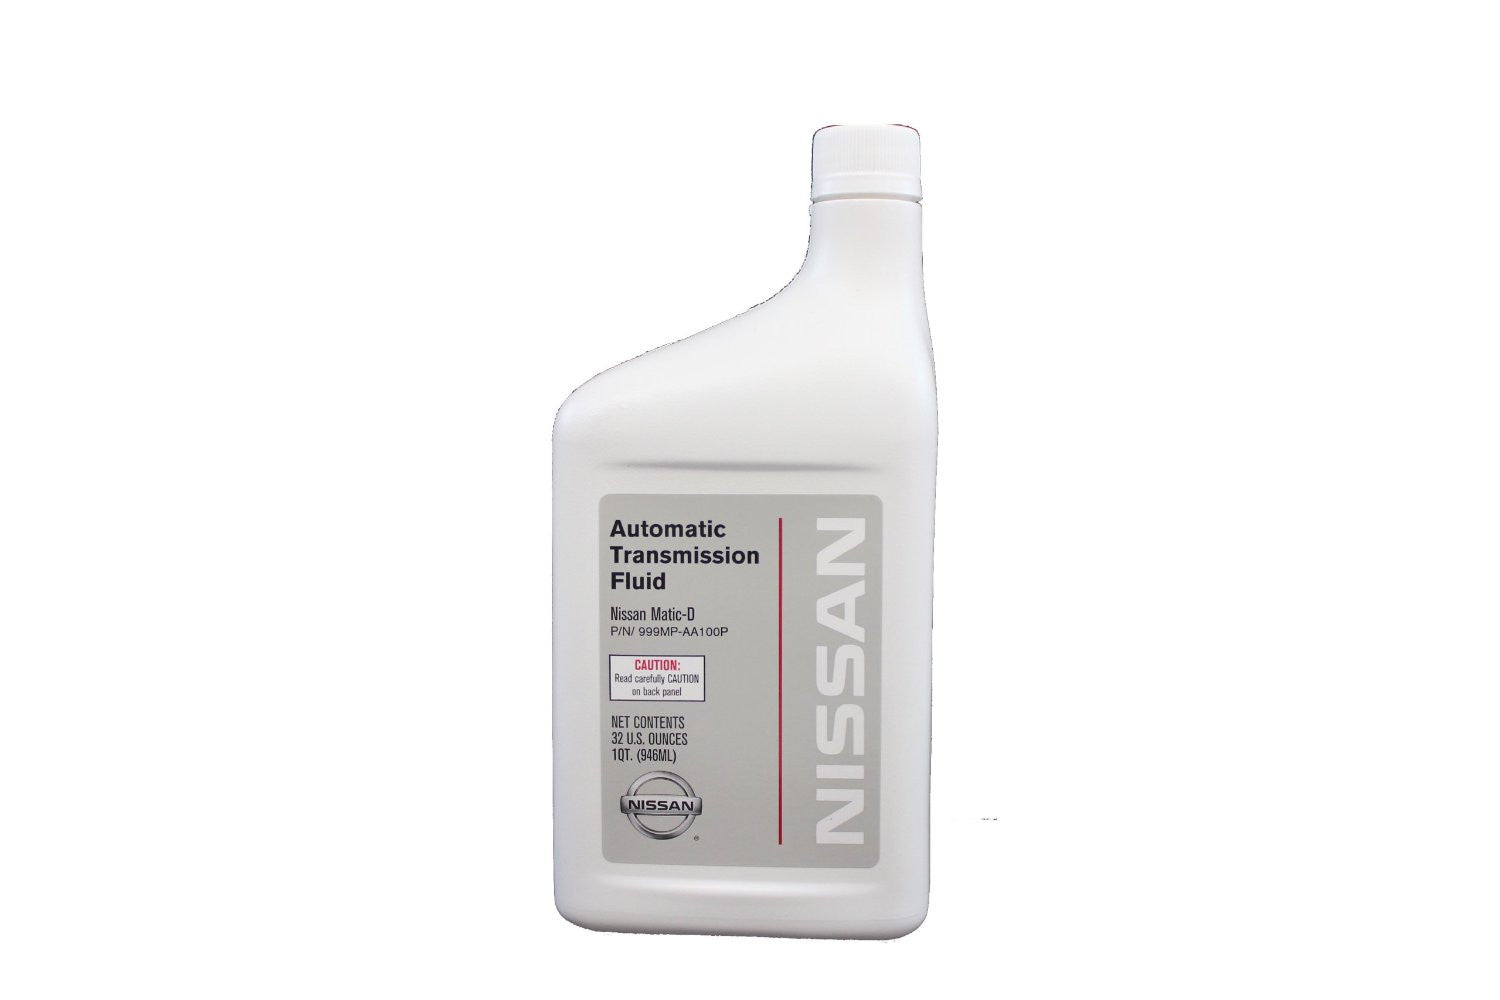 Масло nissan atf. Nissan ATF matic d Fluid. Nissan matic Fluid d 1 л. Nissan matic Fluid s 4л. Nissan matic Fluid d 4л (kle22-00004).